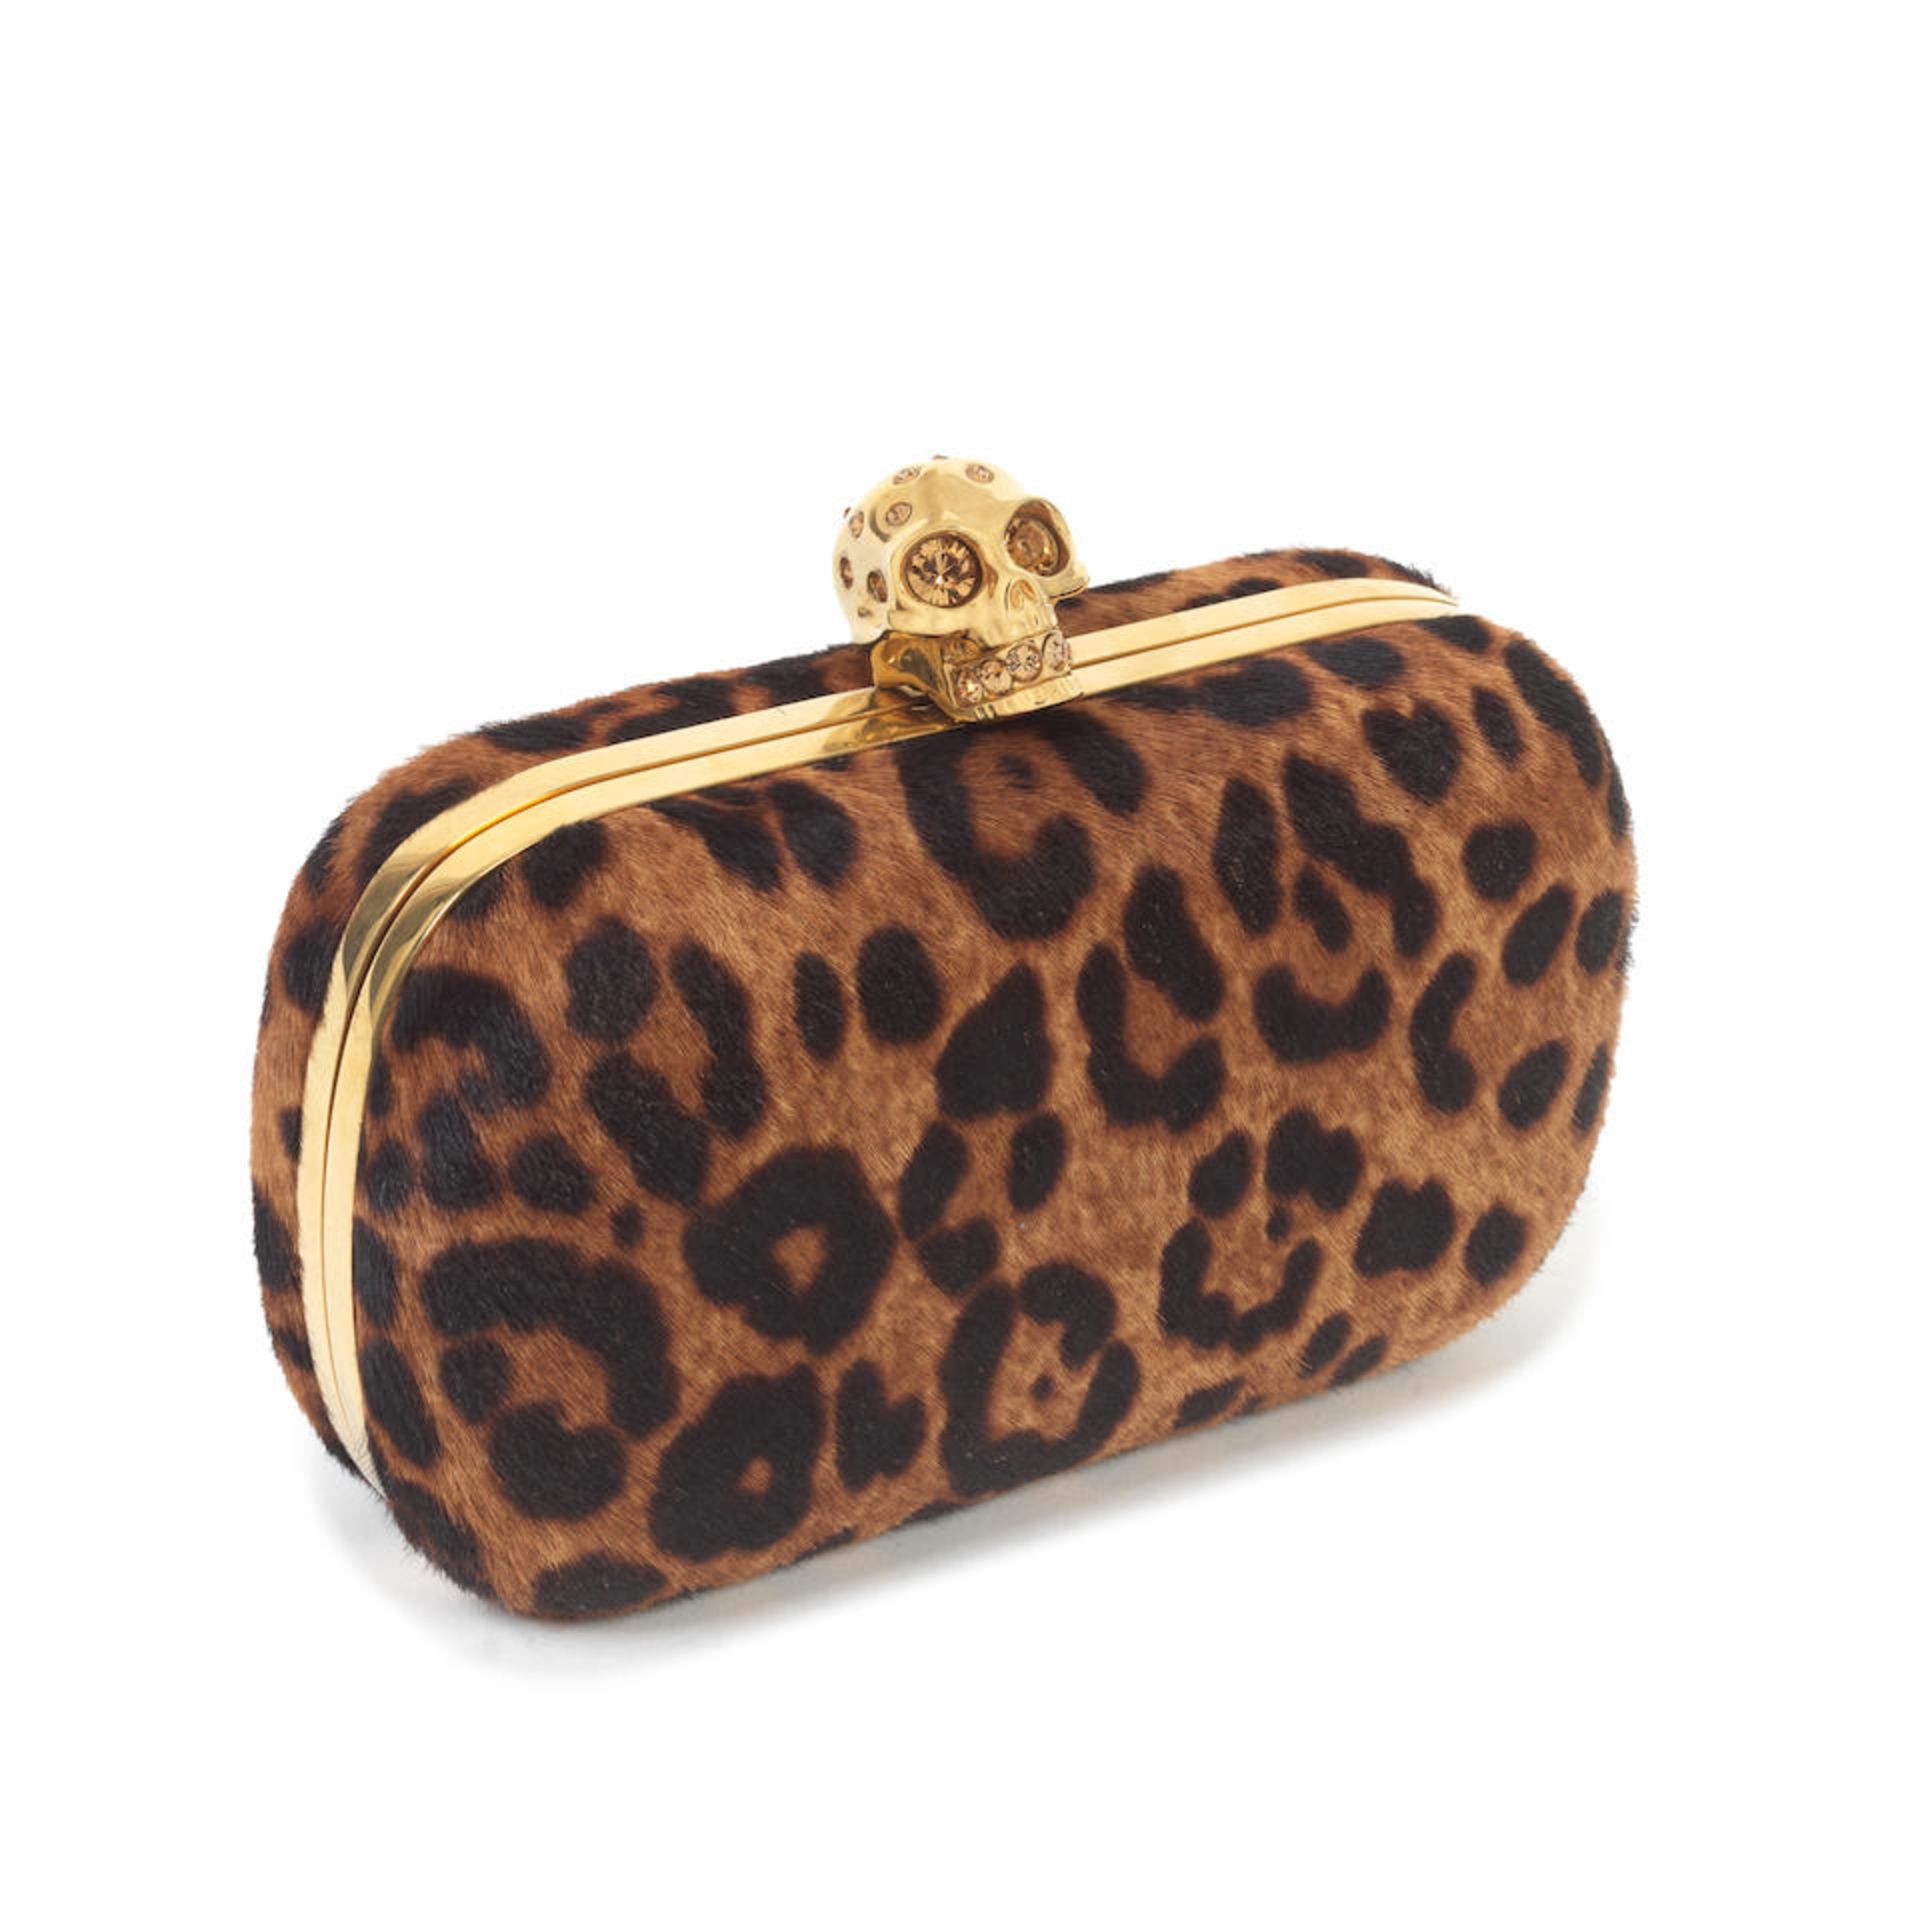 Alexander McQueen: a Leopard Pony Skin Skull Box Clutch 2000s (includes dust bag and box) - Image 2 of 2